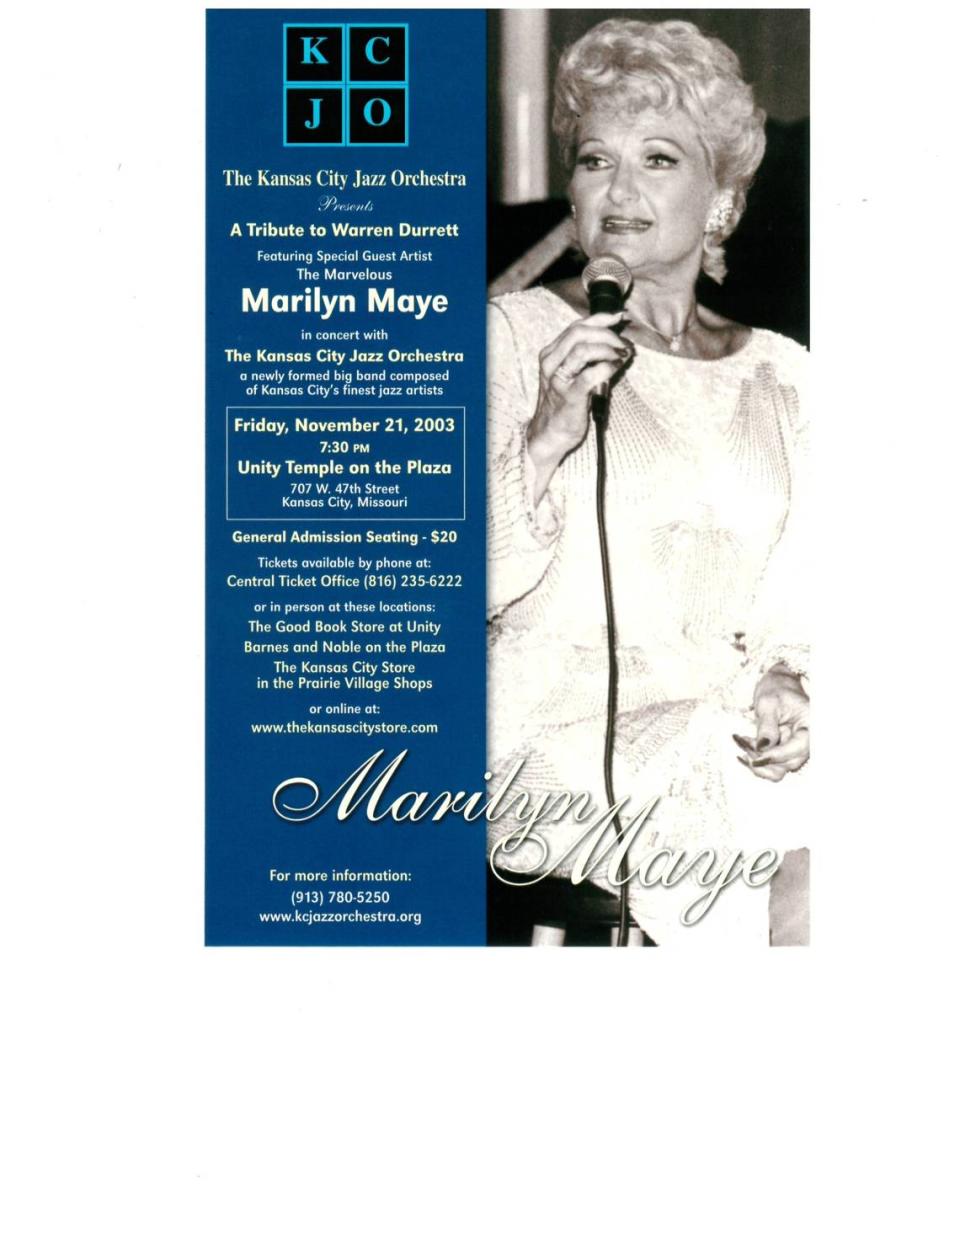 Marilyn Maye first performed with the Kansas City Jazz Orchestra in 2003.